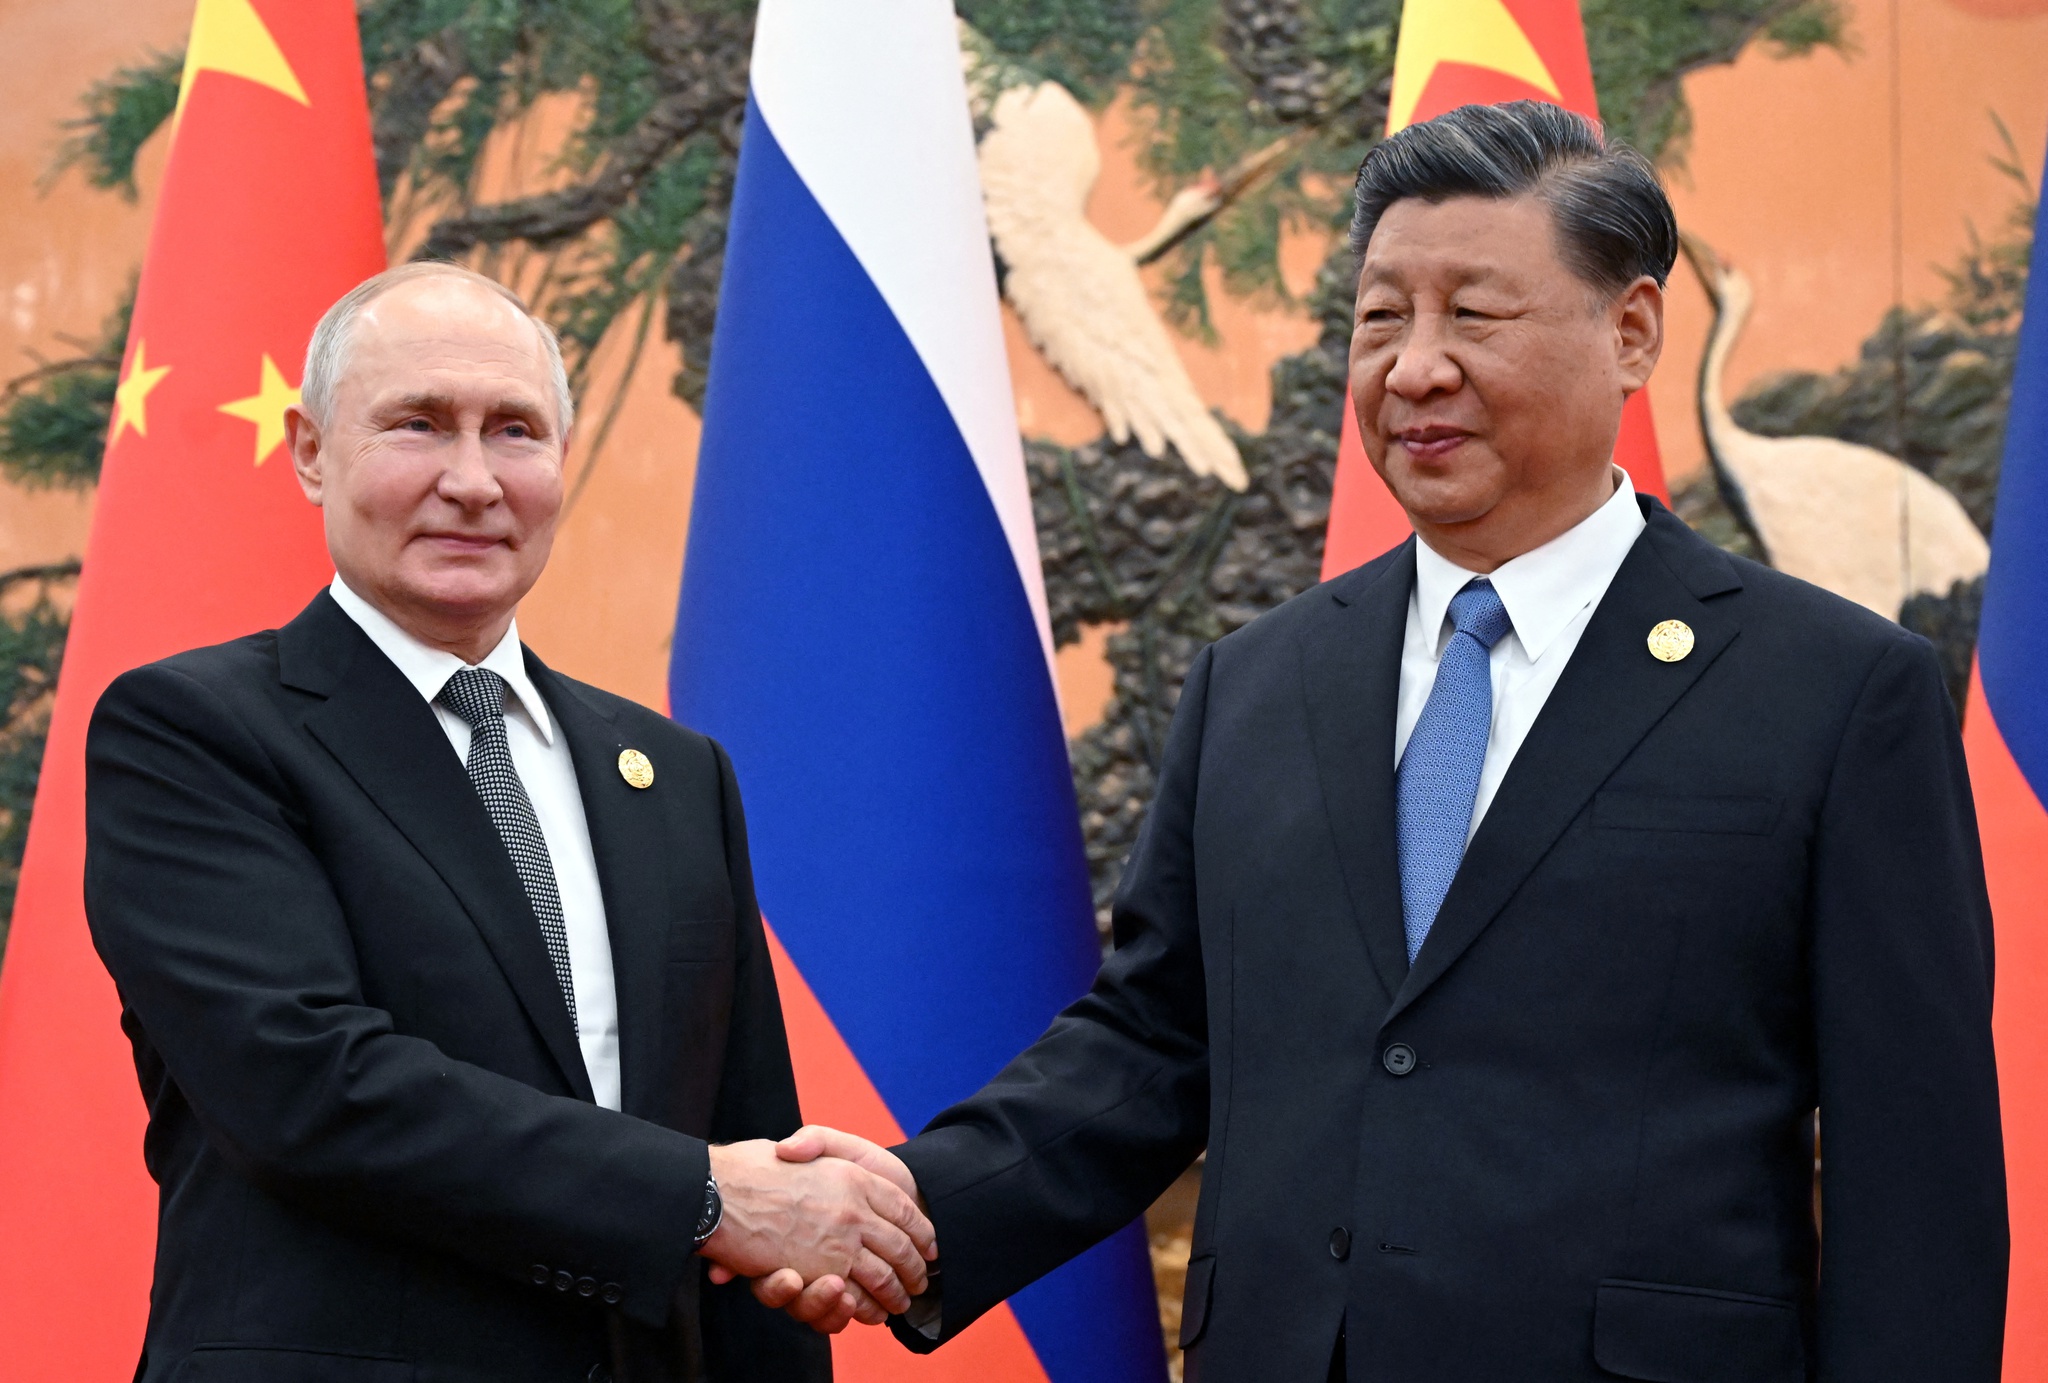 Xi Jinping in Kazakhstan for security summit, possible meeting with Putin | Diplomacy